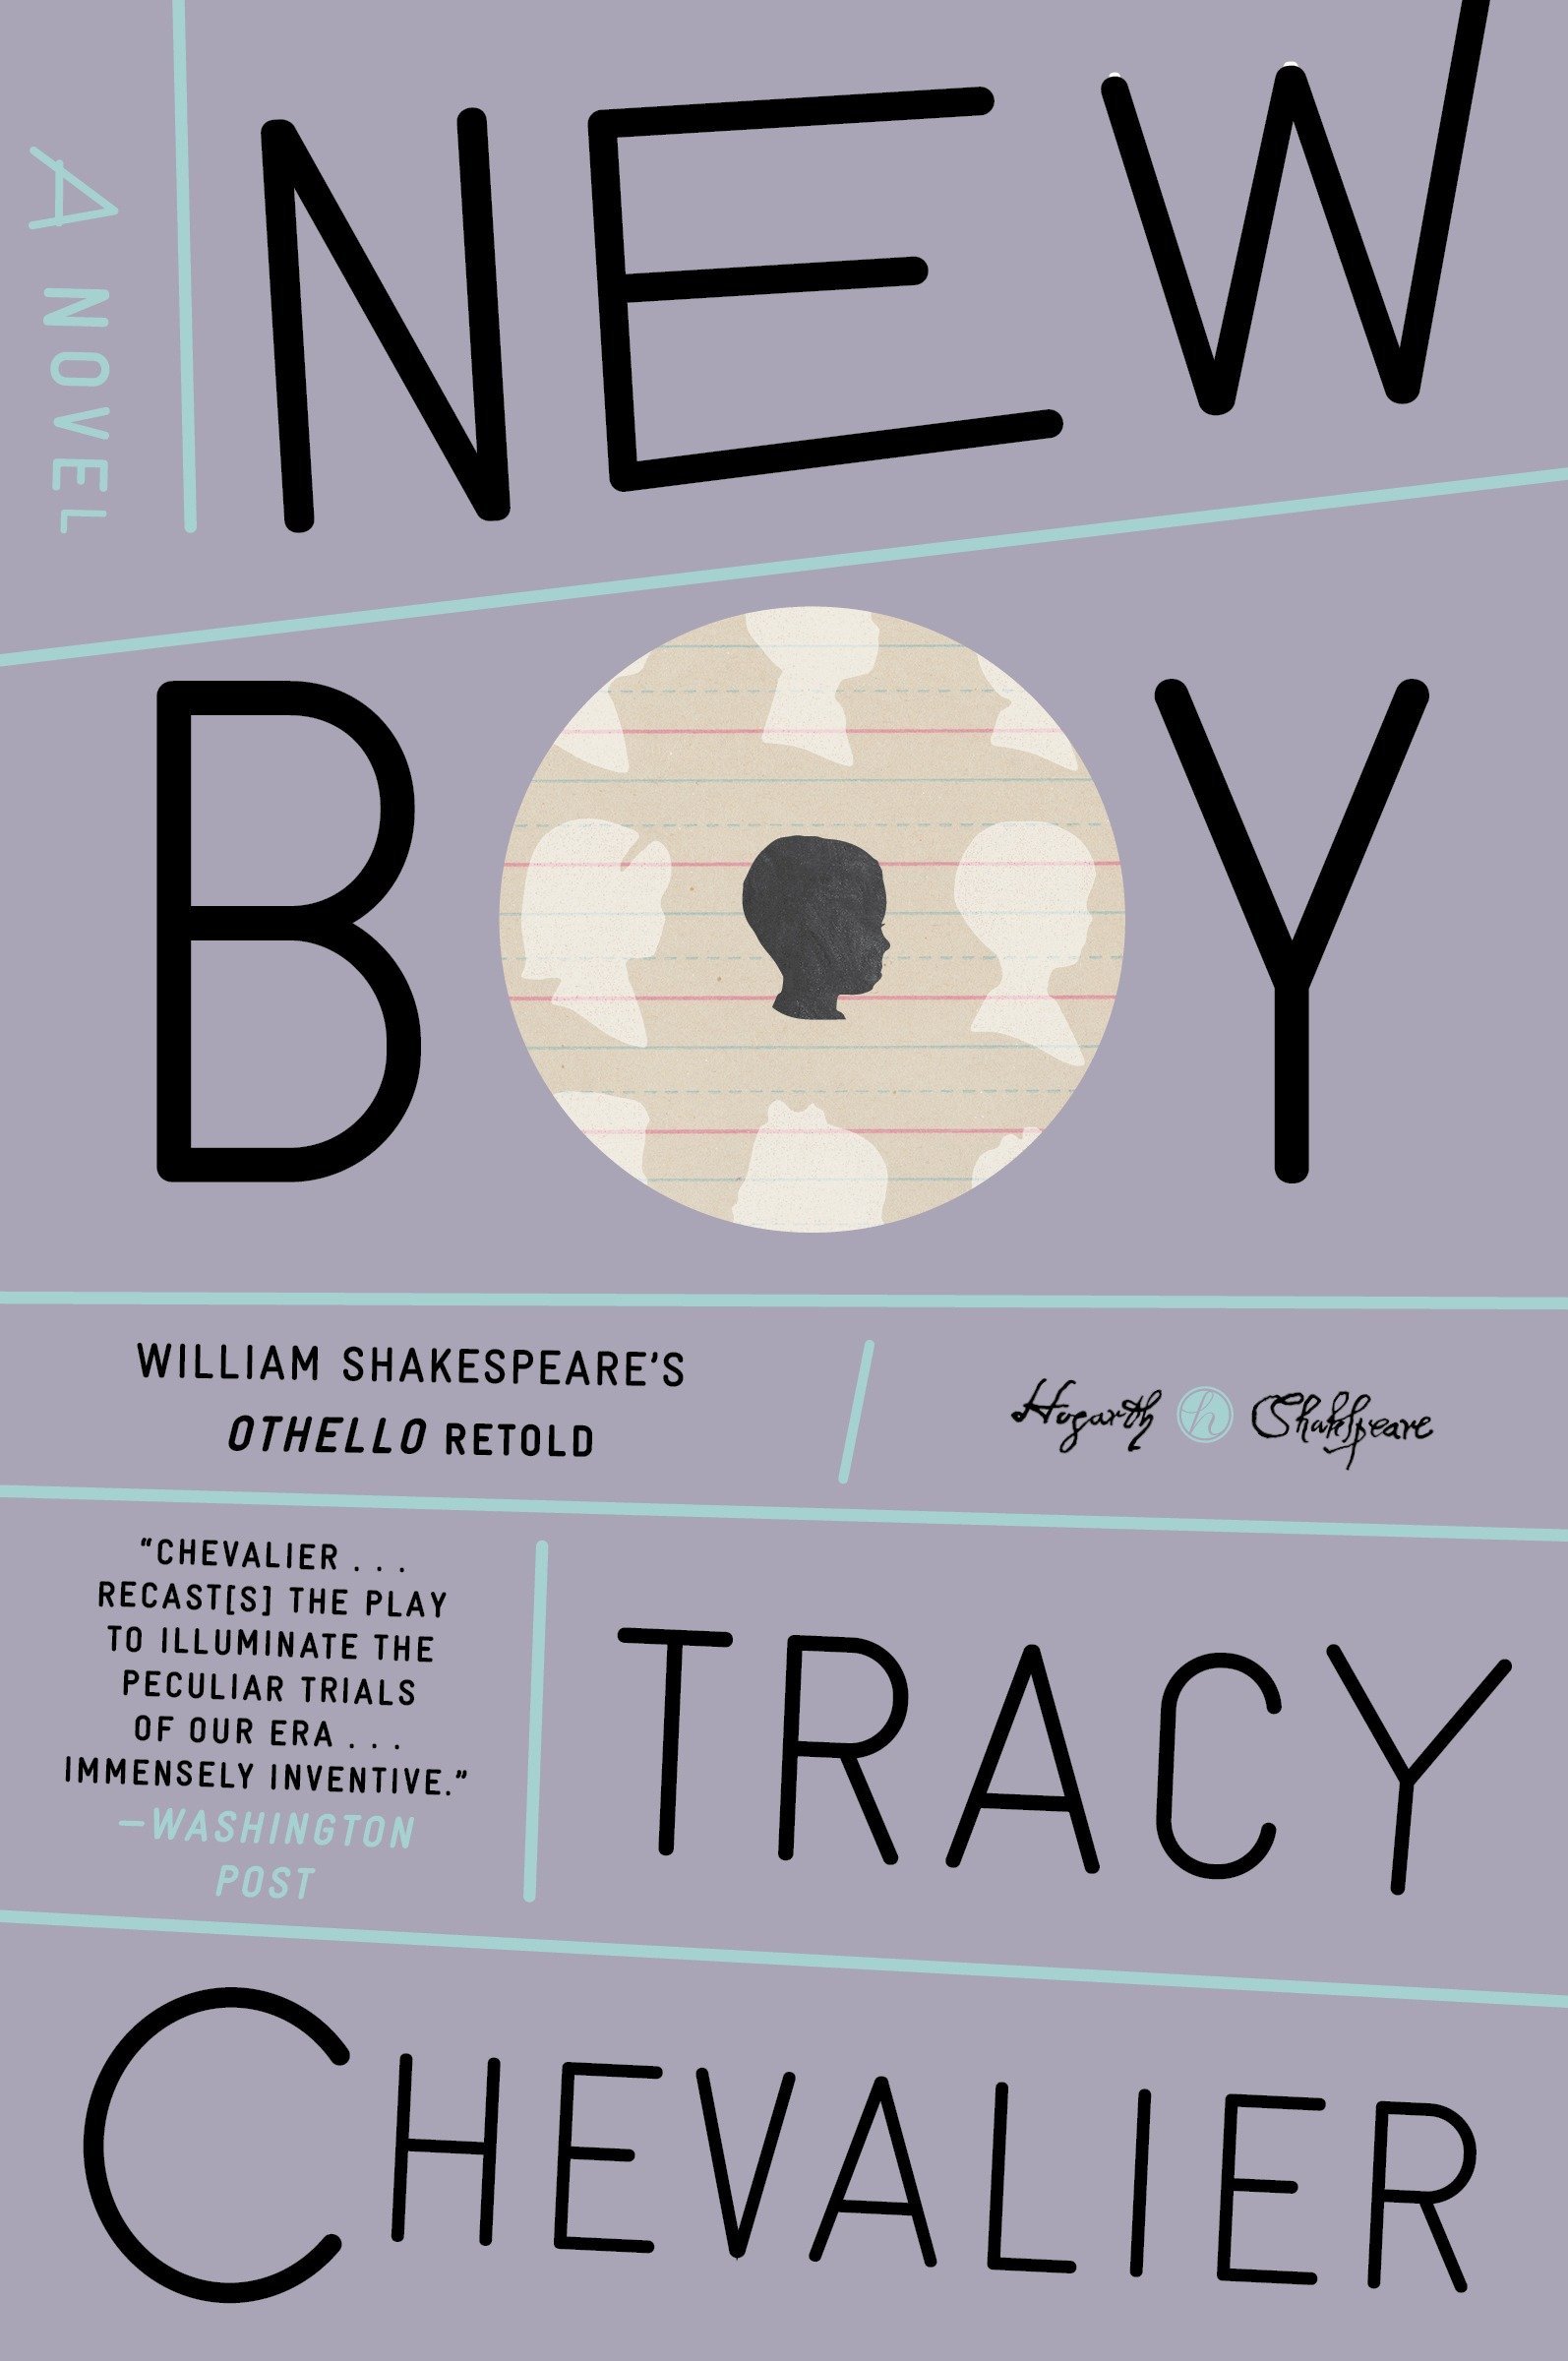 A modern book cover design for a novel entitled "new boy," which is a retelling of william shakespeare's play "othello" as quoted by tracy chevalier, set against a backdrop of geometric lines and featuring a silhouette of a boy within a circle at the center.